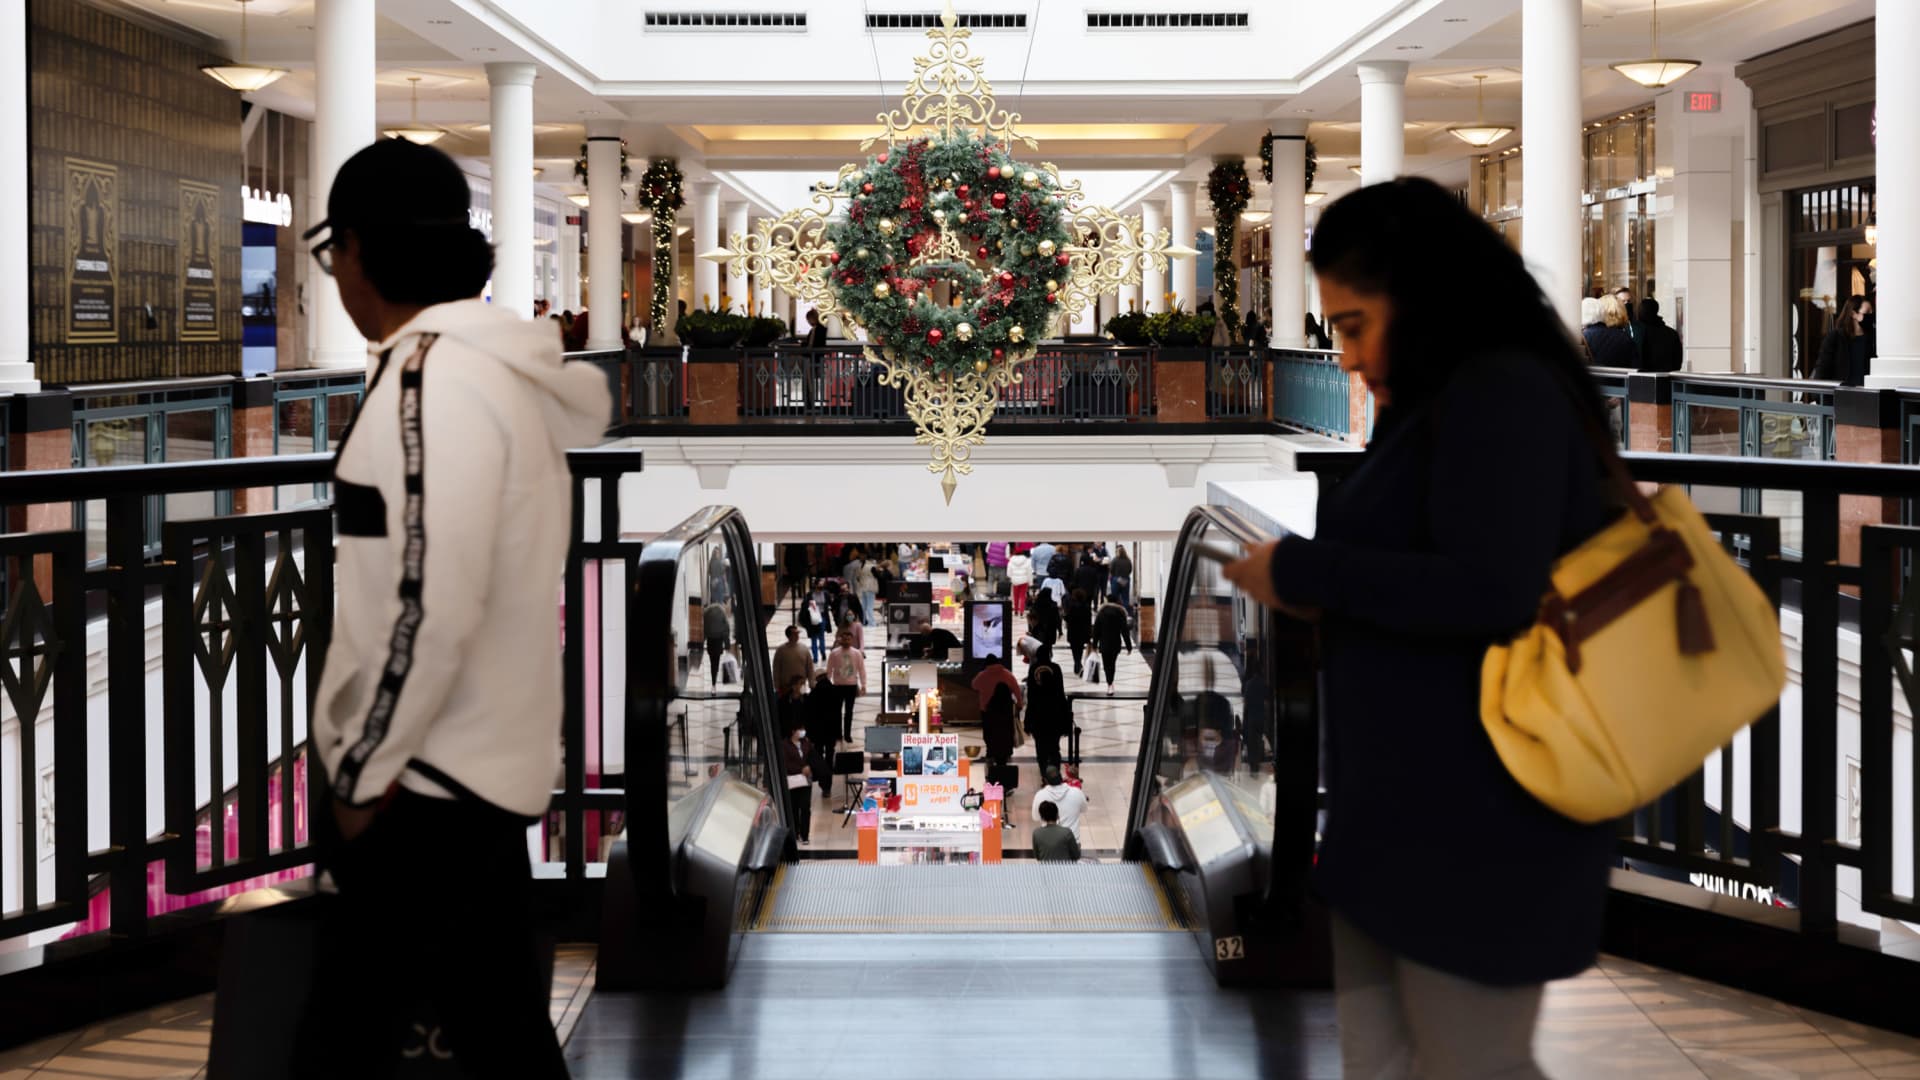 Consumers’ caution around holiday spending is the highest since 2013, CNBC survey shows